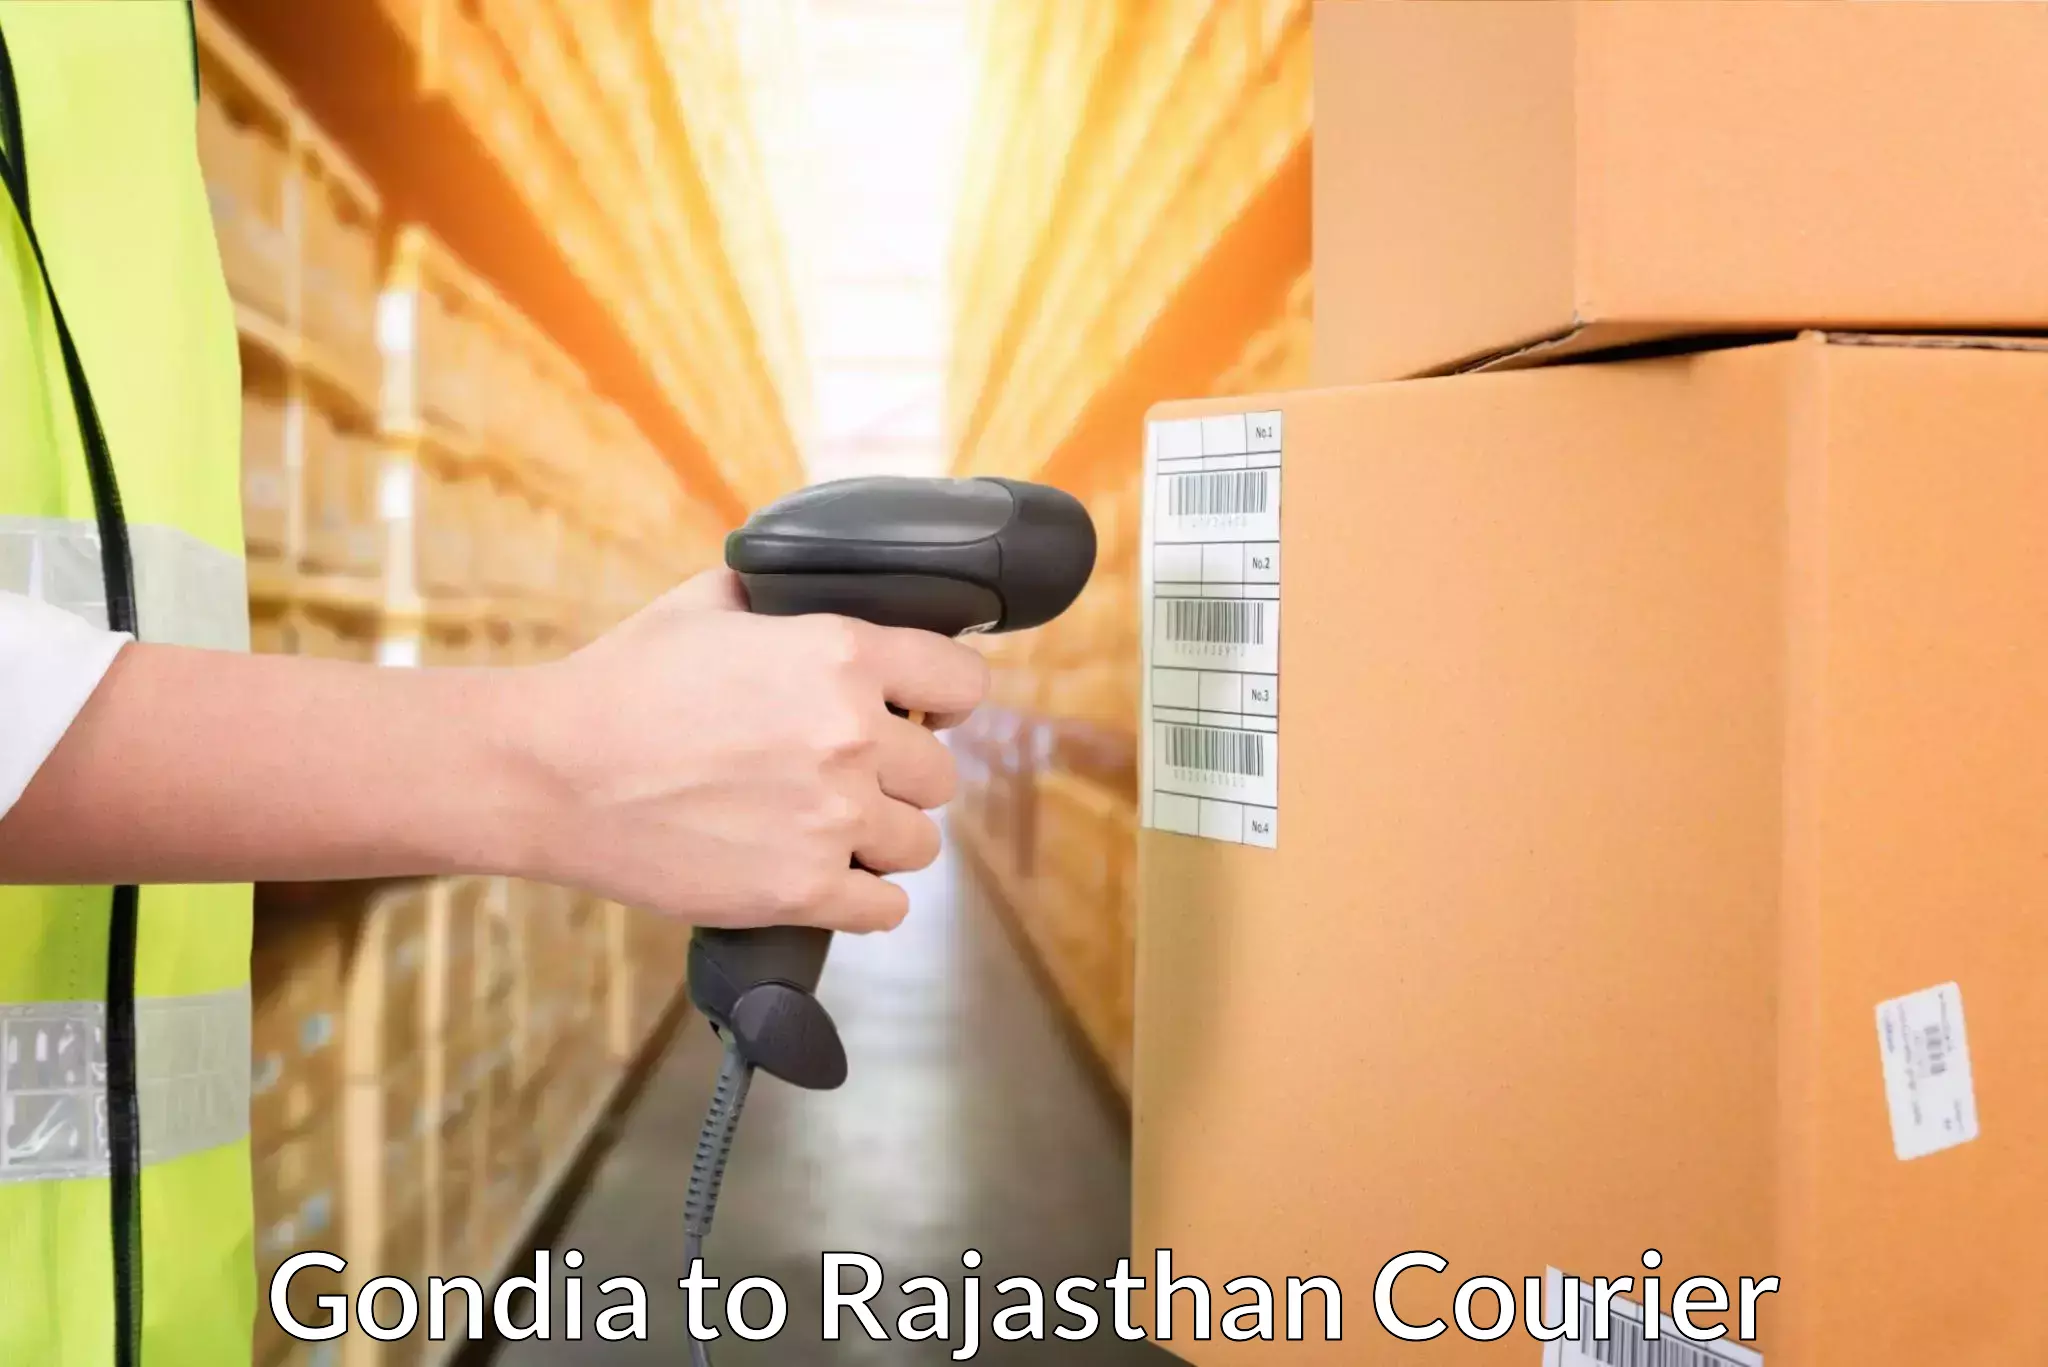 Courier service comparison in Gondia to Mathania